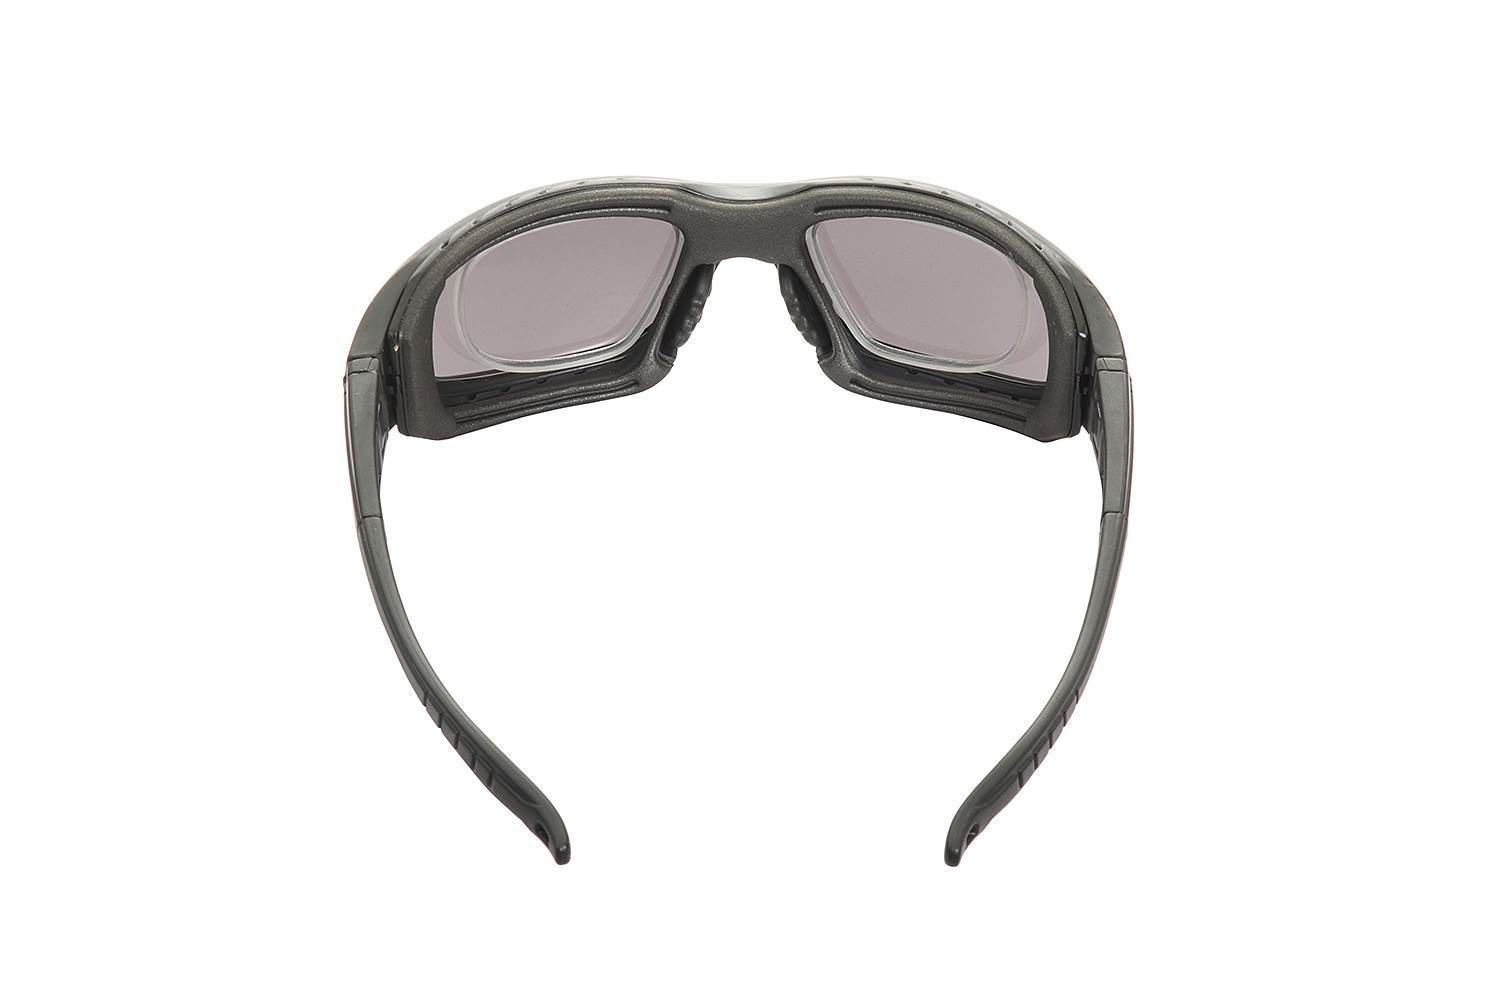 MALLCOM Altair Multi Lens Safety Goggles with spares